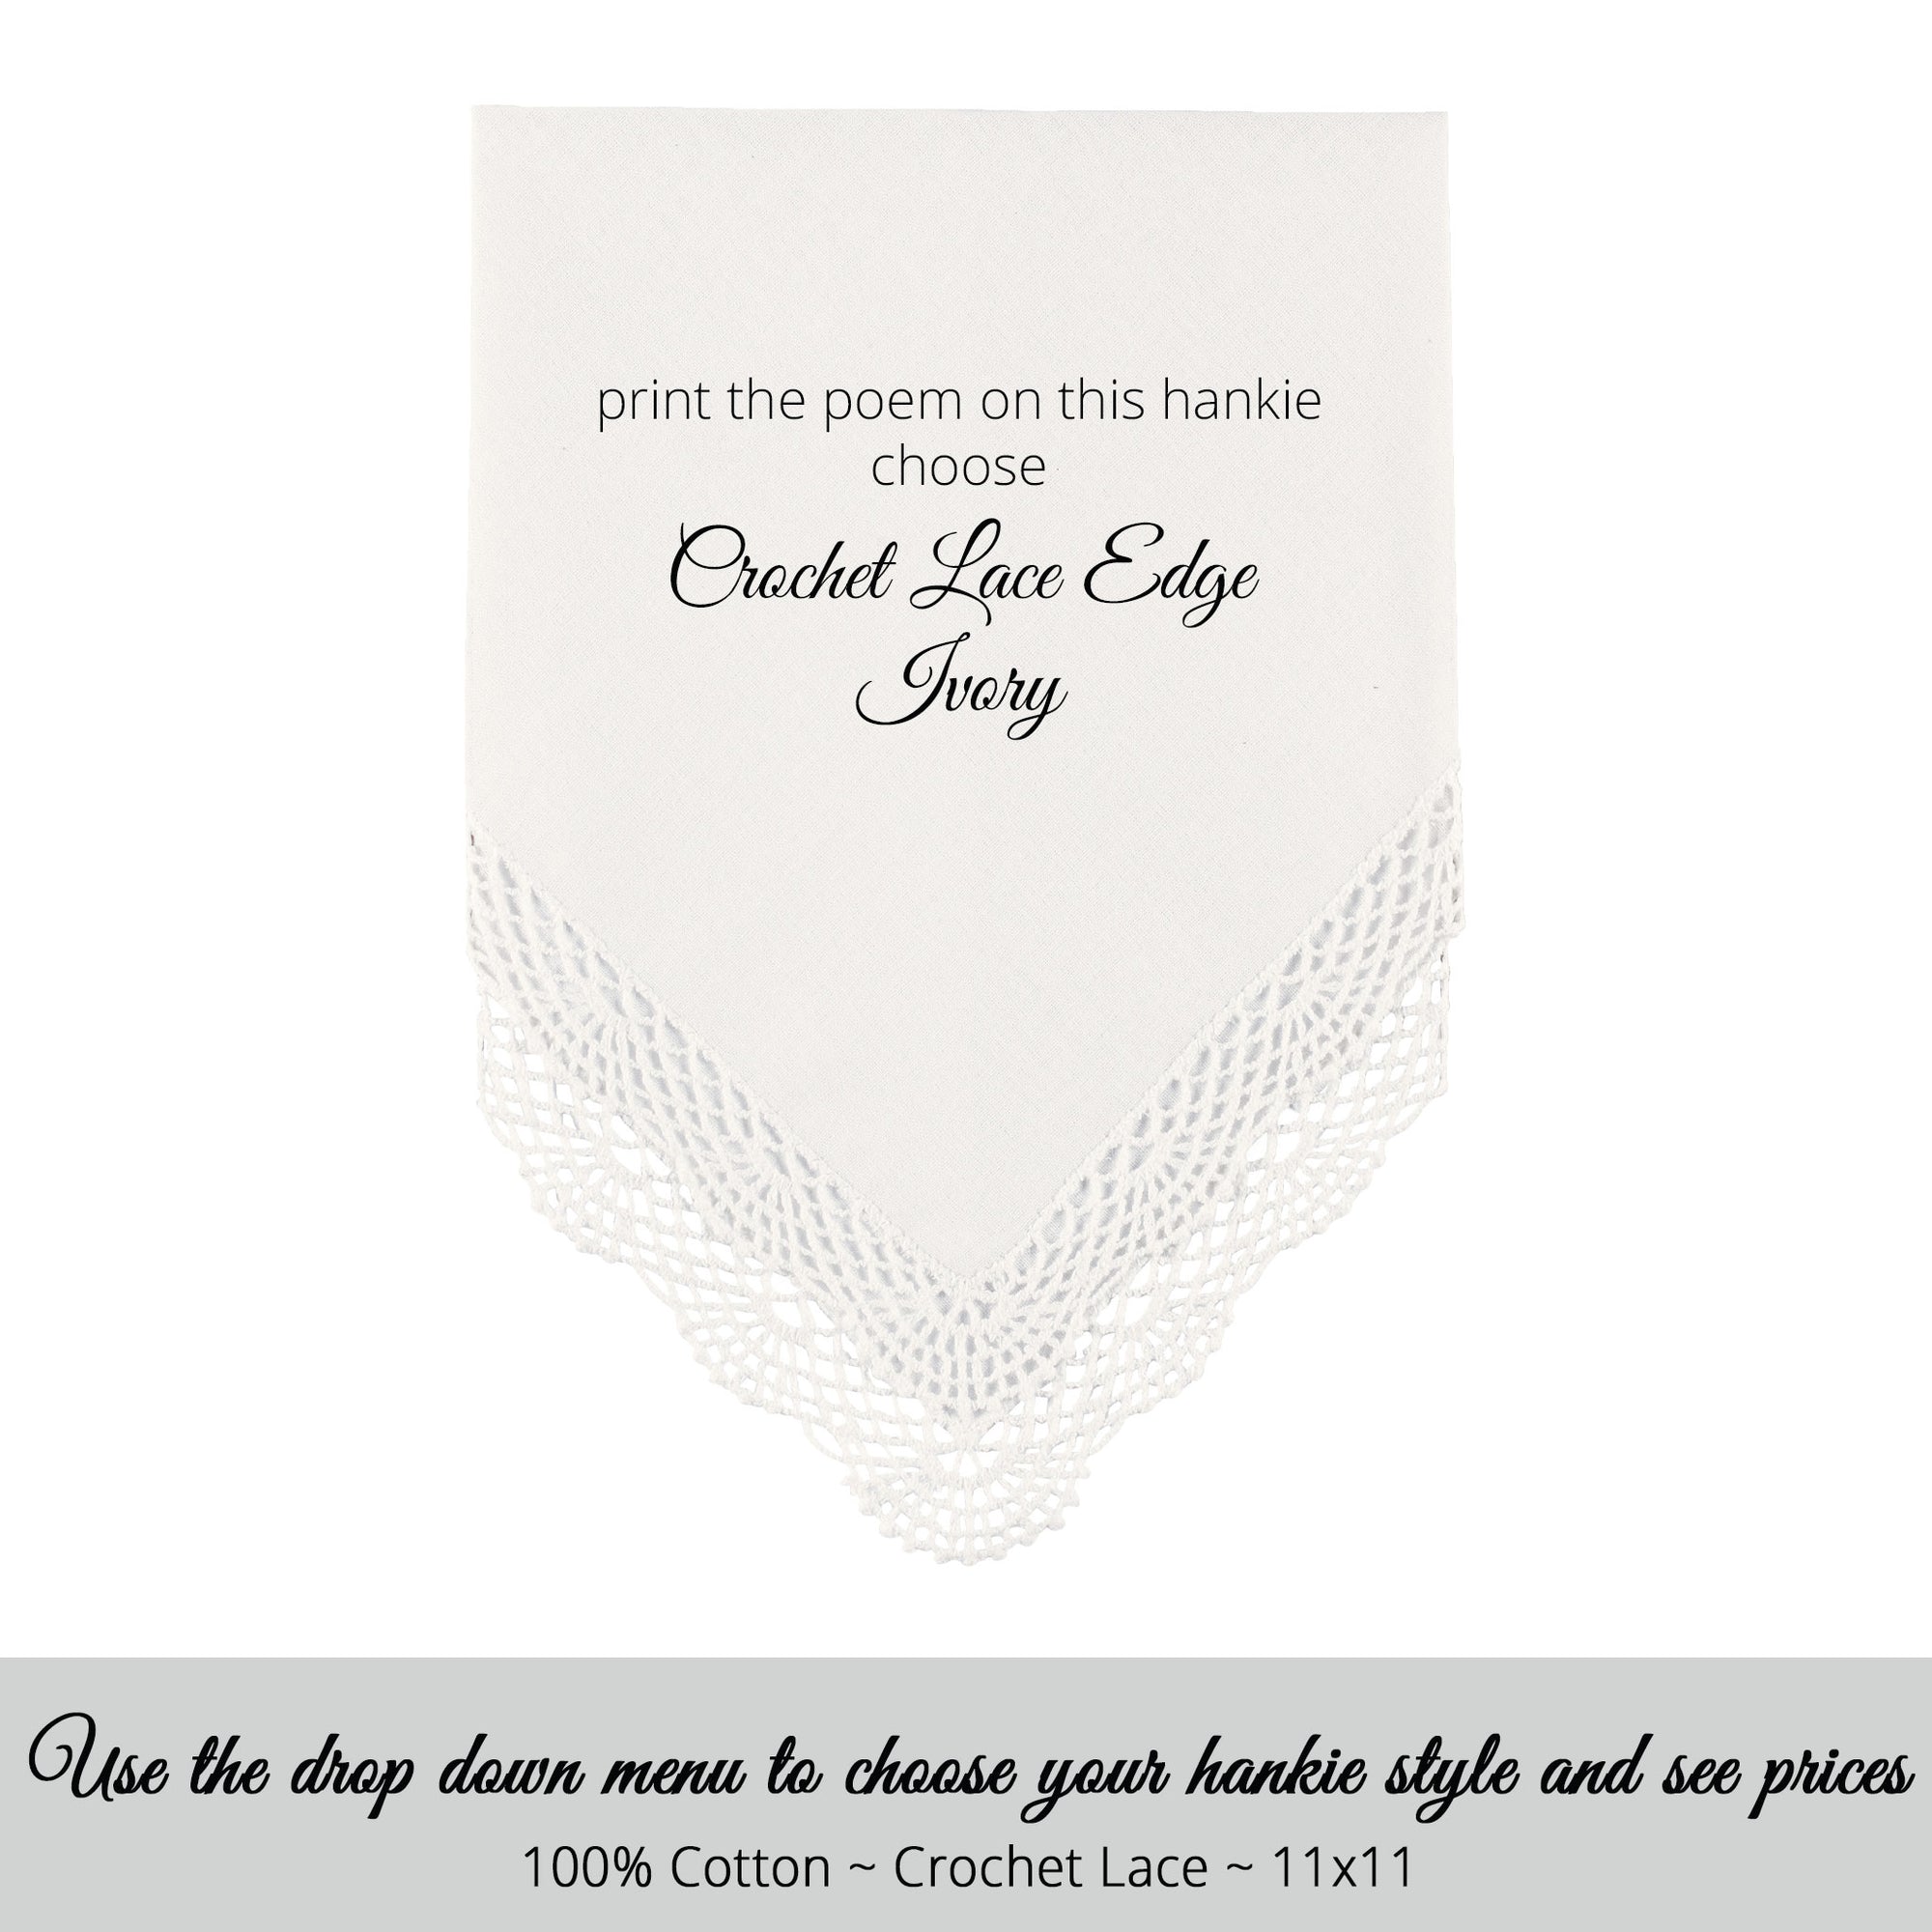 Wedding handkerchief ivory with crochet lace edge for the stepmother of the bride poem printed hankie